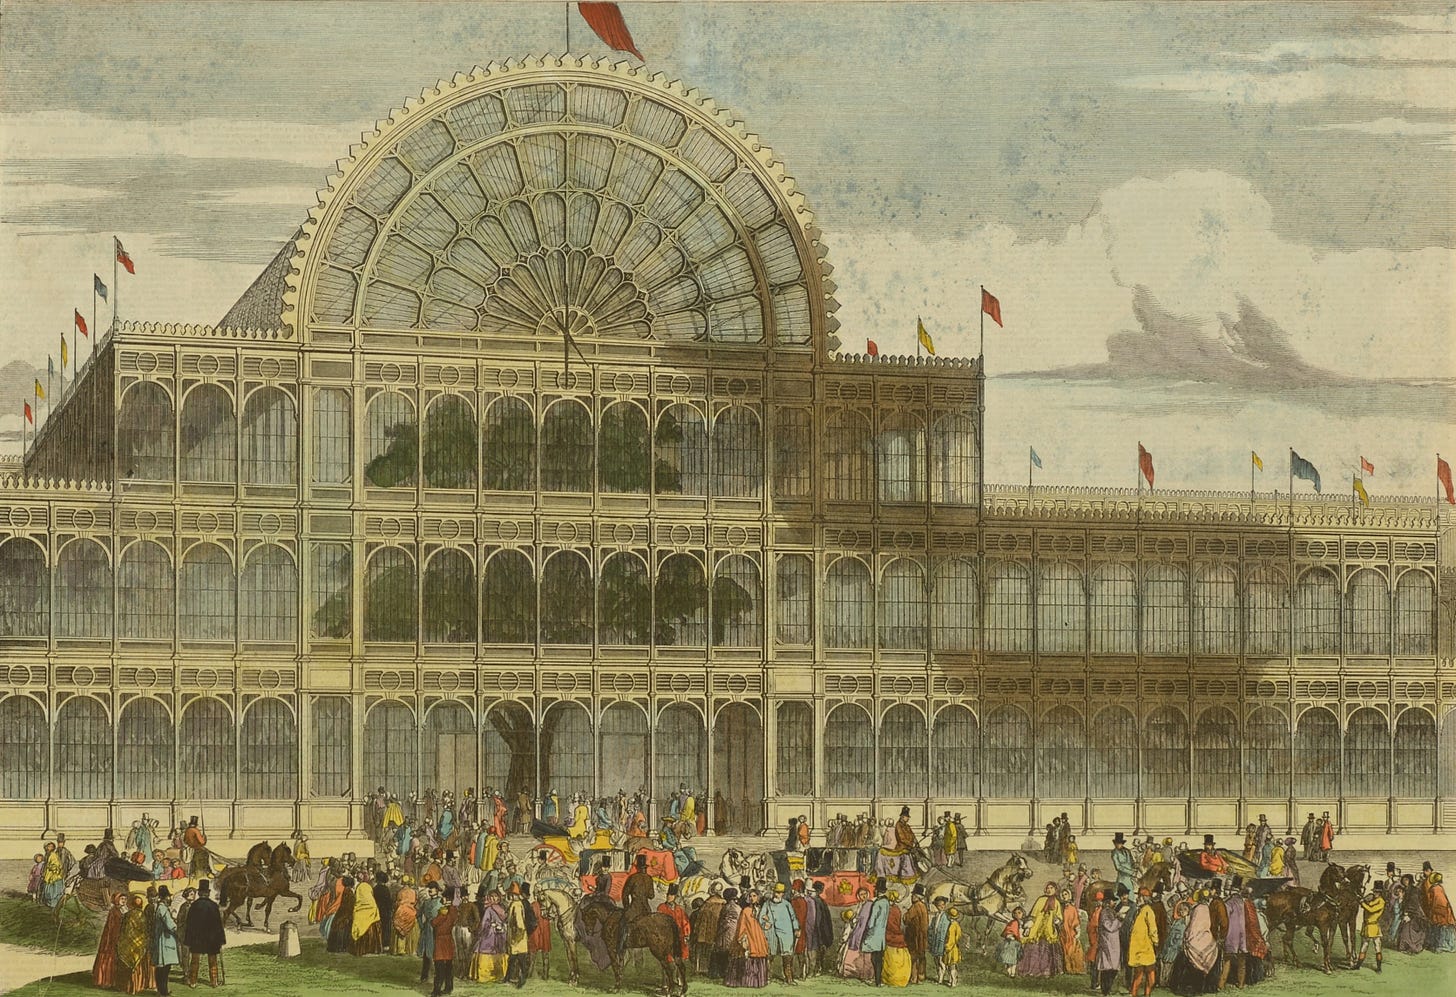 The Great Exhibition of 1851 in Hyde Park | The Royal Parks